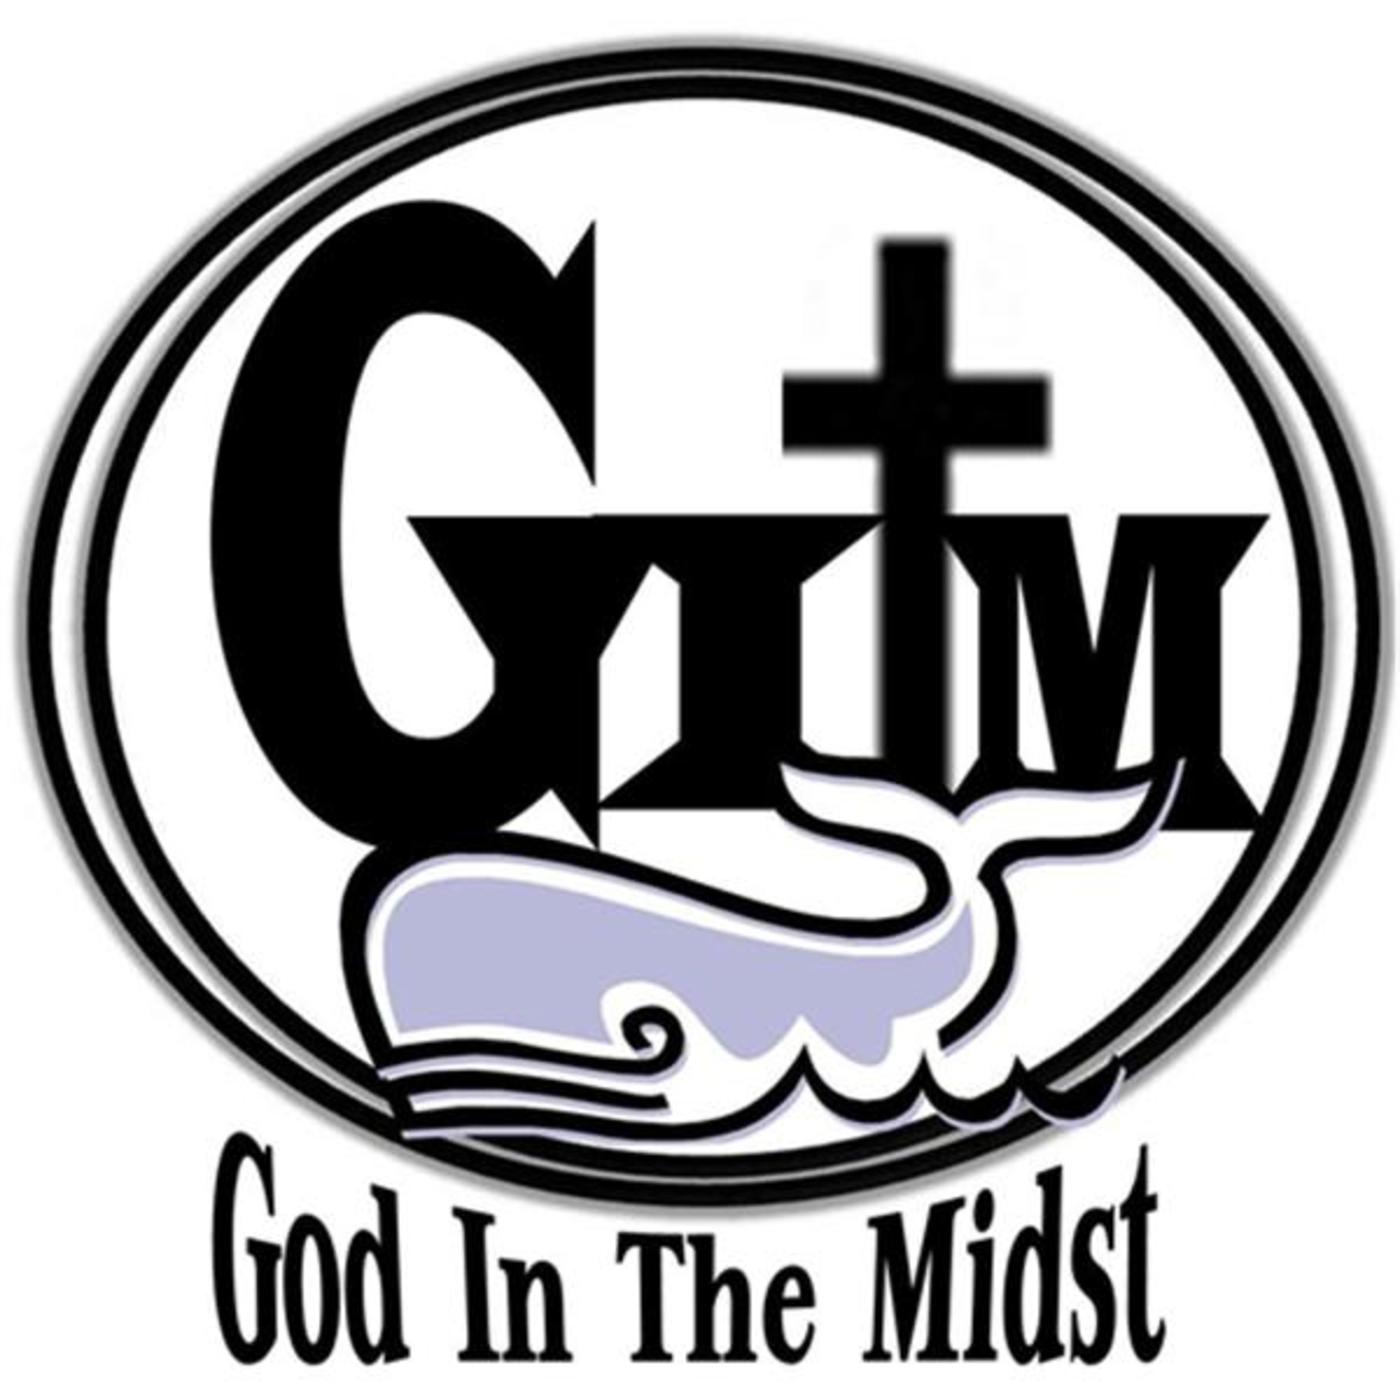 God In The Midst